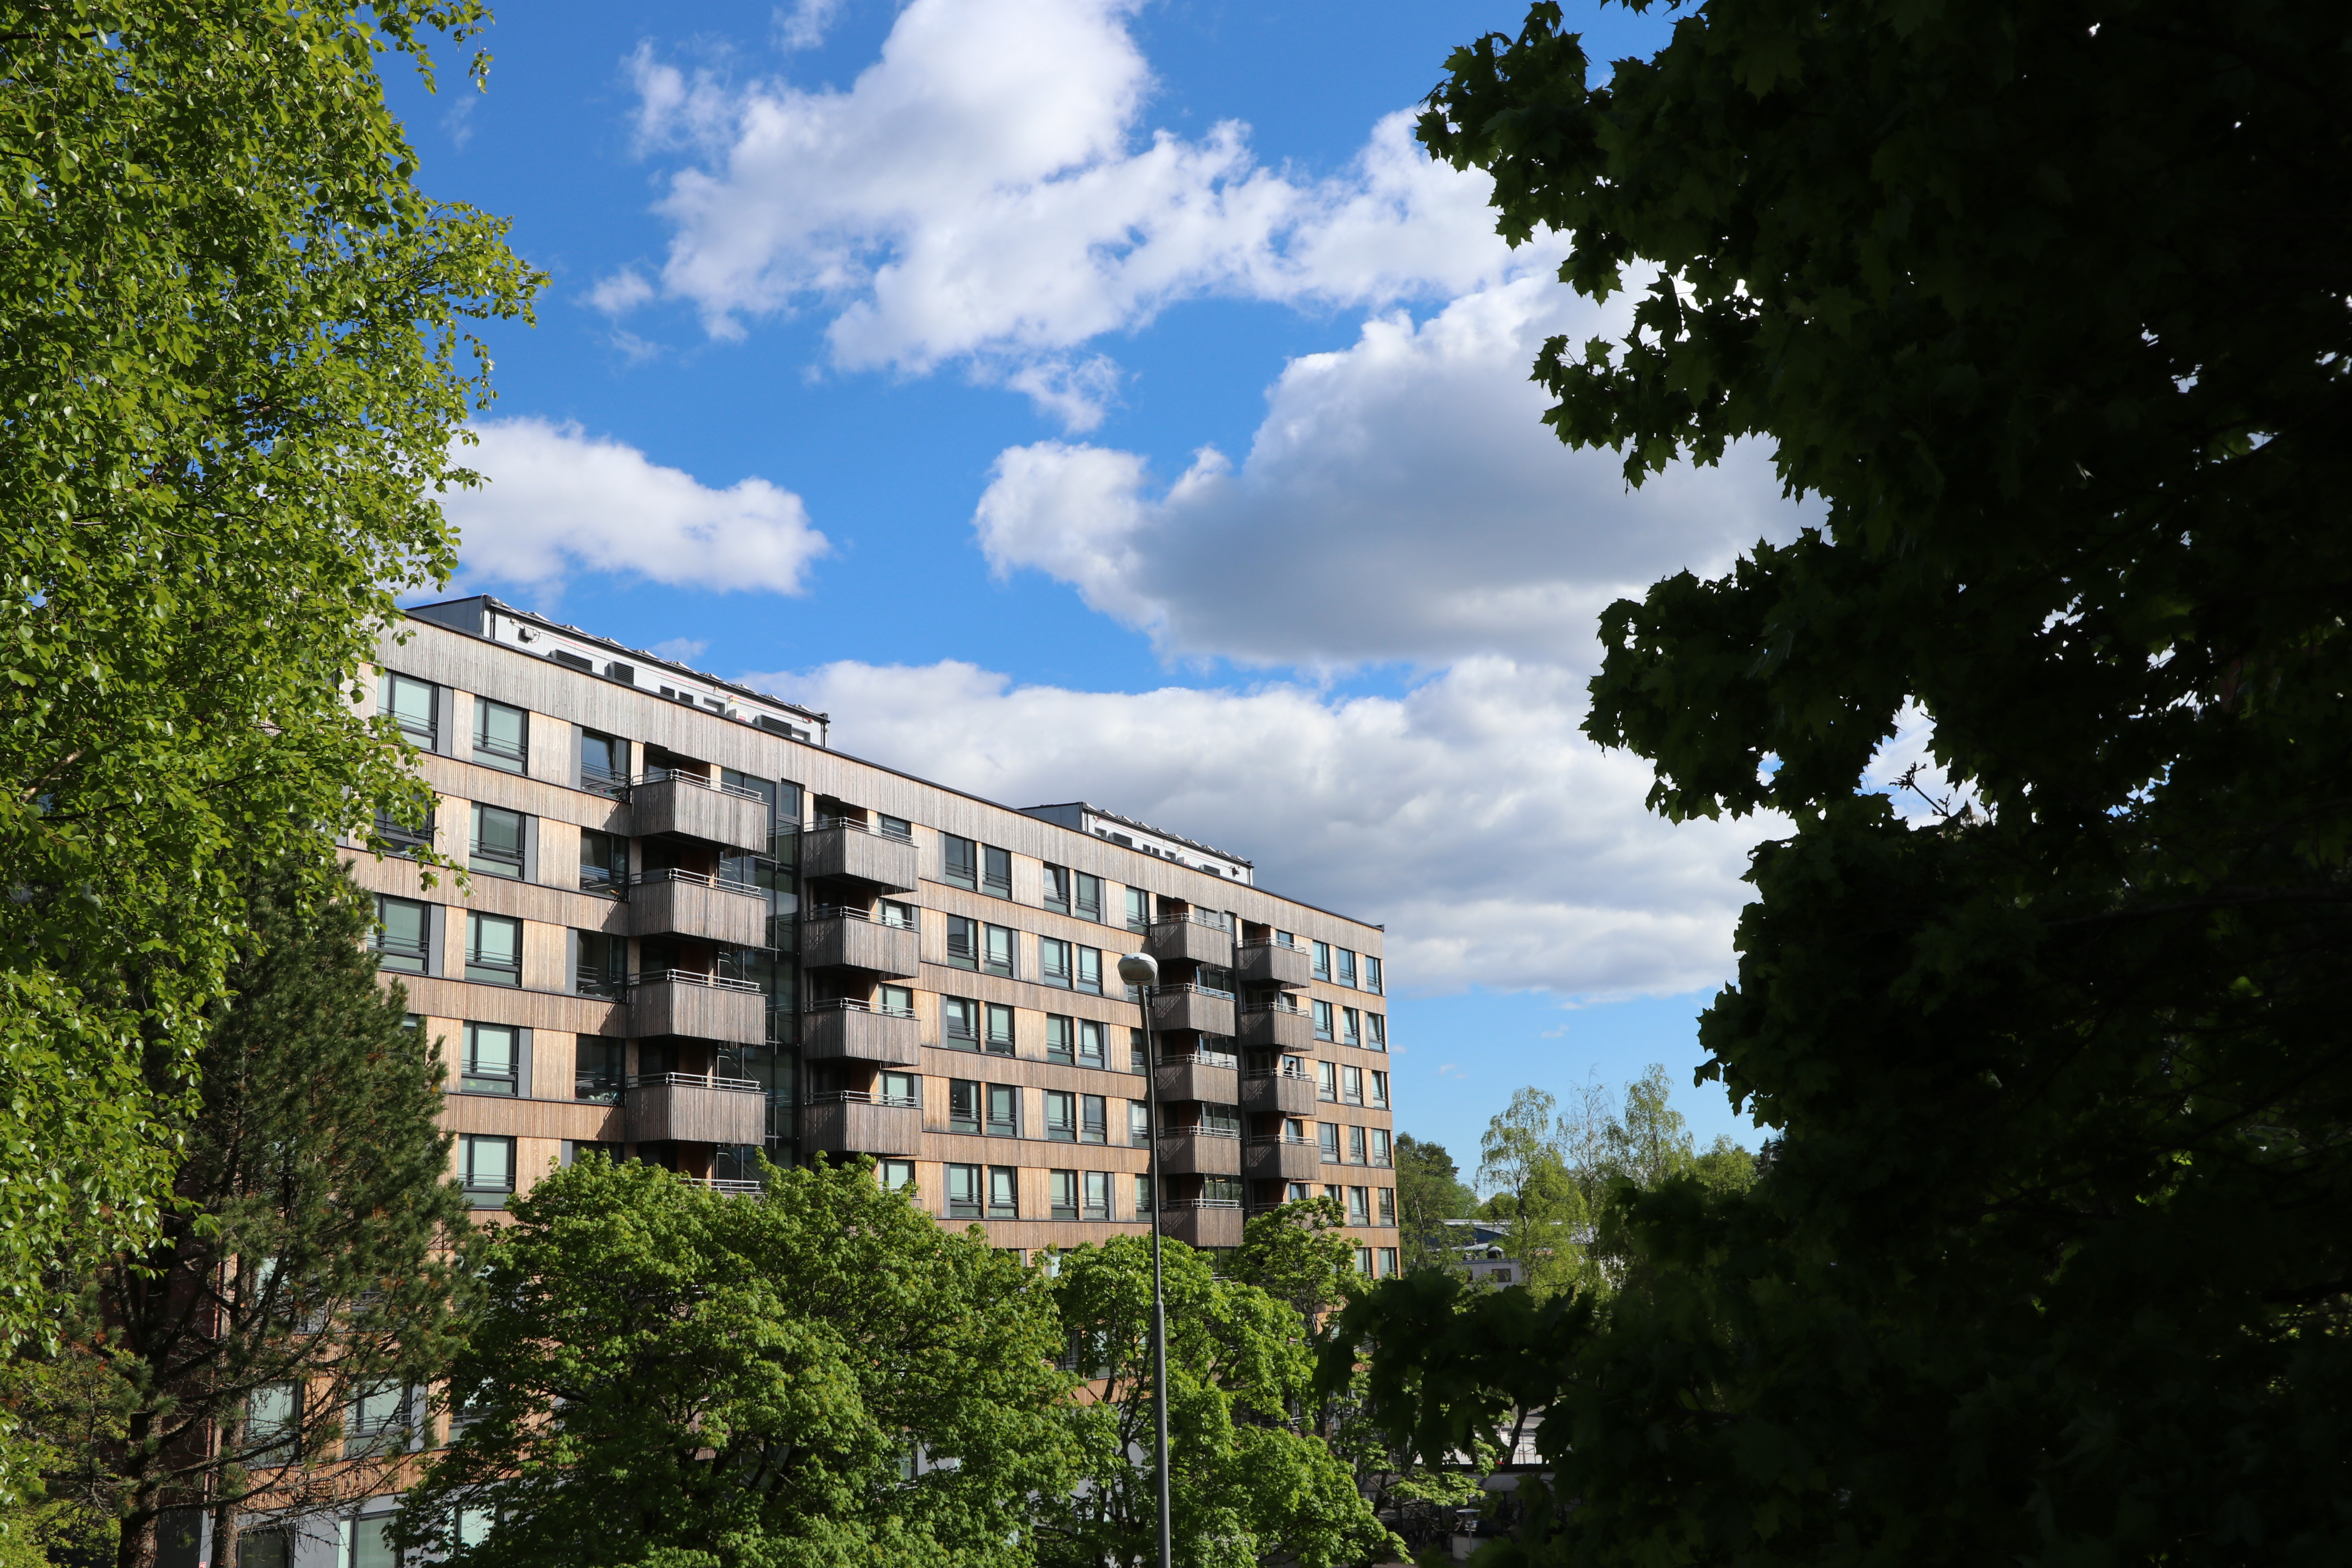 A picture of Kringsjå Student House. The picture shows brown high-rise buildings. Some of the apartments have balconies. In the foreground of the picture, there are several trees.